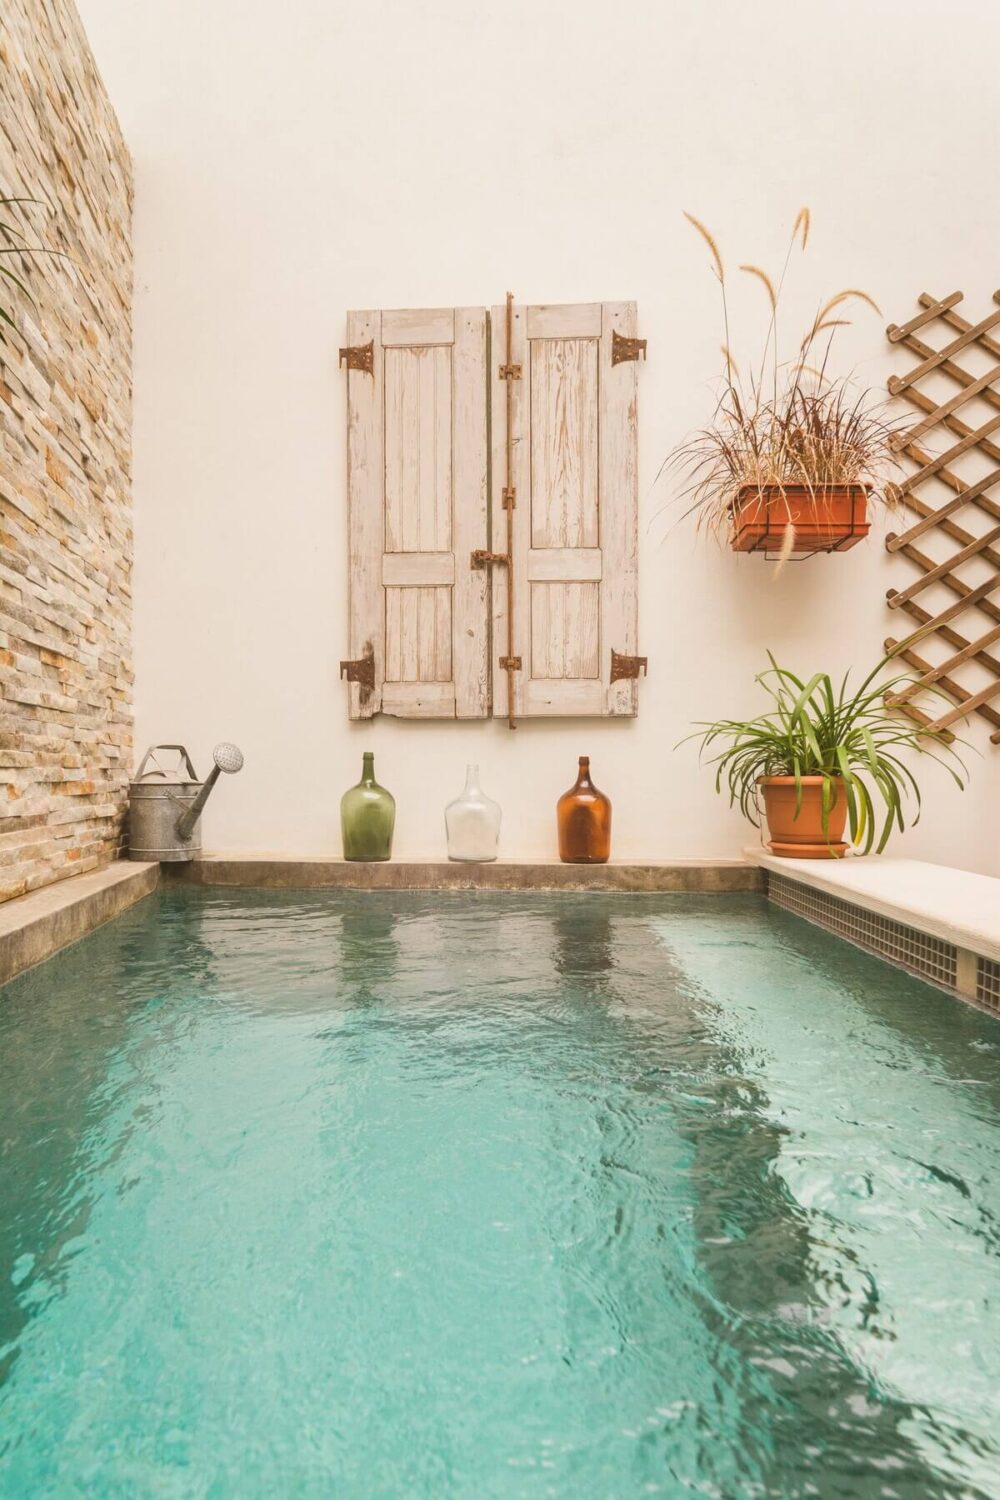 patio-small-swimming-pool-airbnb-portugal-nordroom